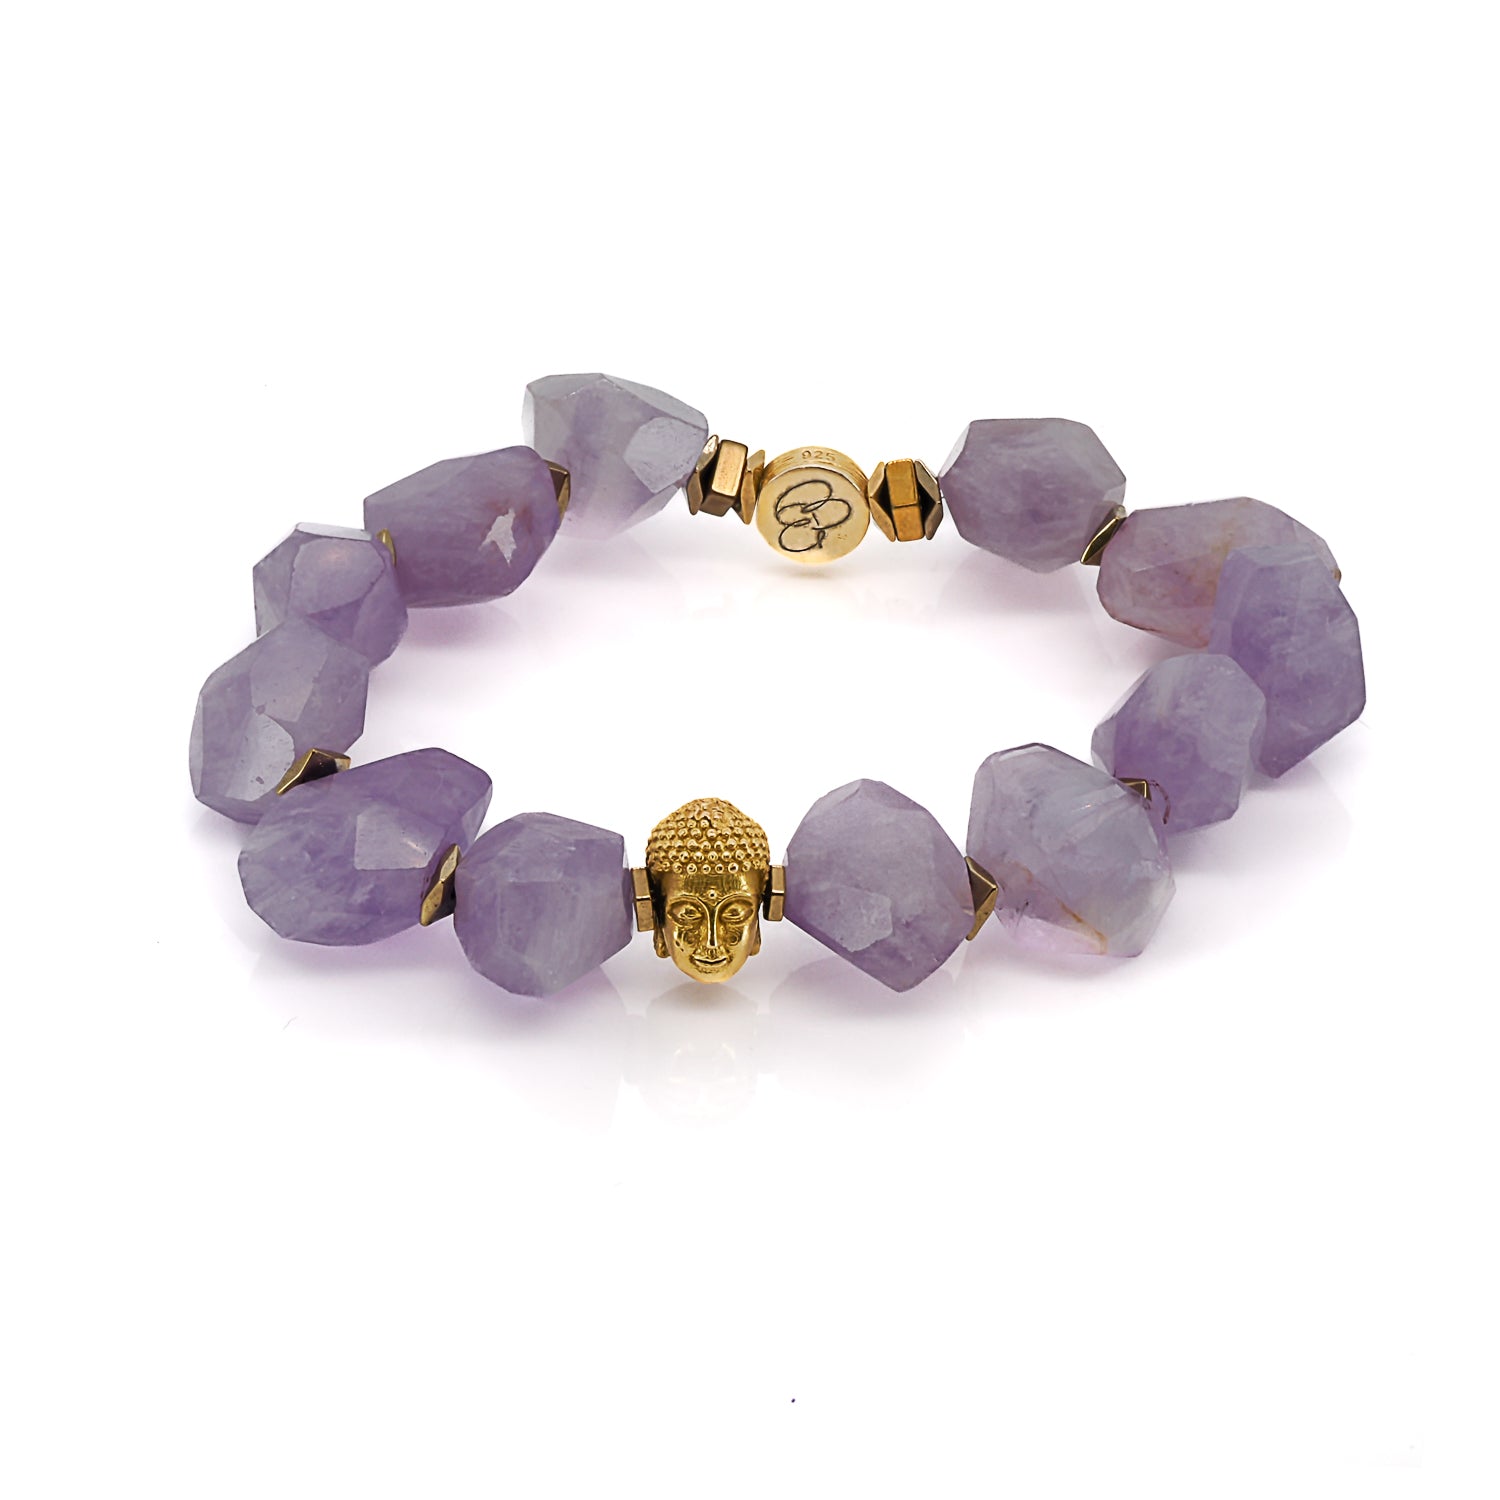 The bracelet&#39;s core comprises stunning amethyst stone beads, renowned for their calming and protective properties, making it an ideal choice for those seeking balance and inner peace.